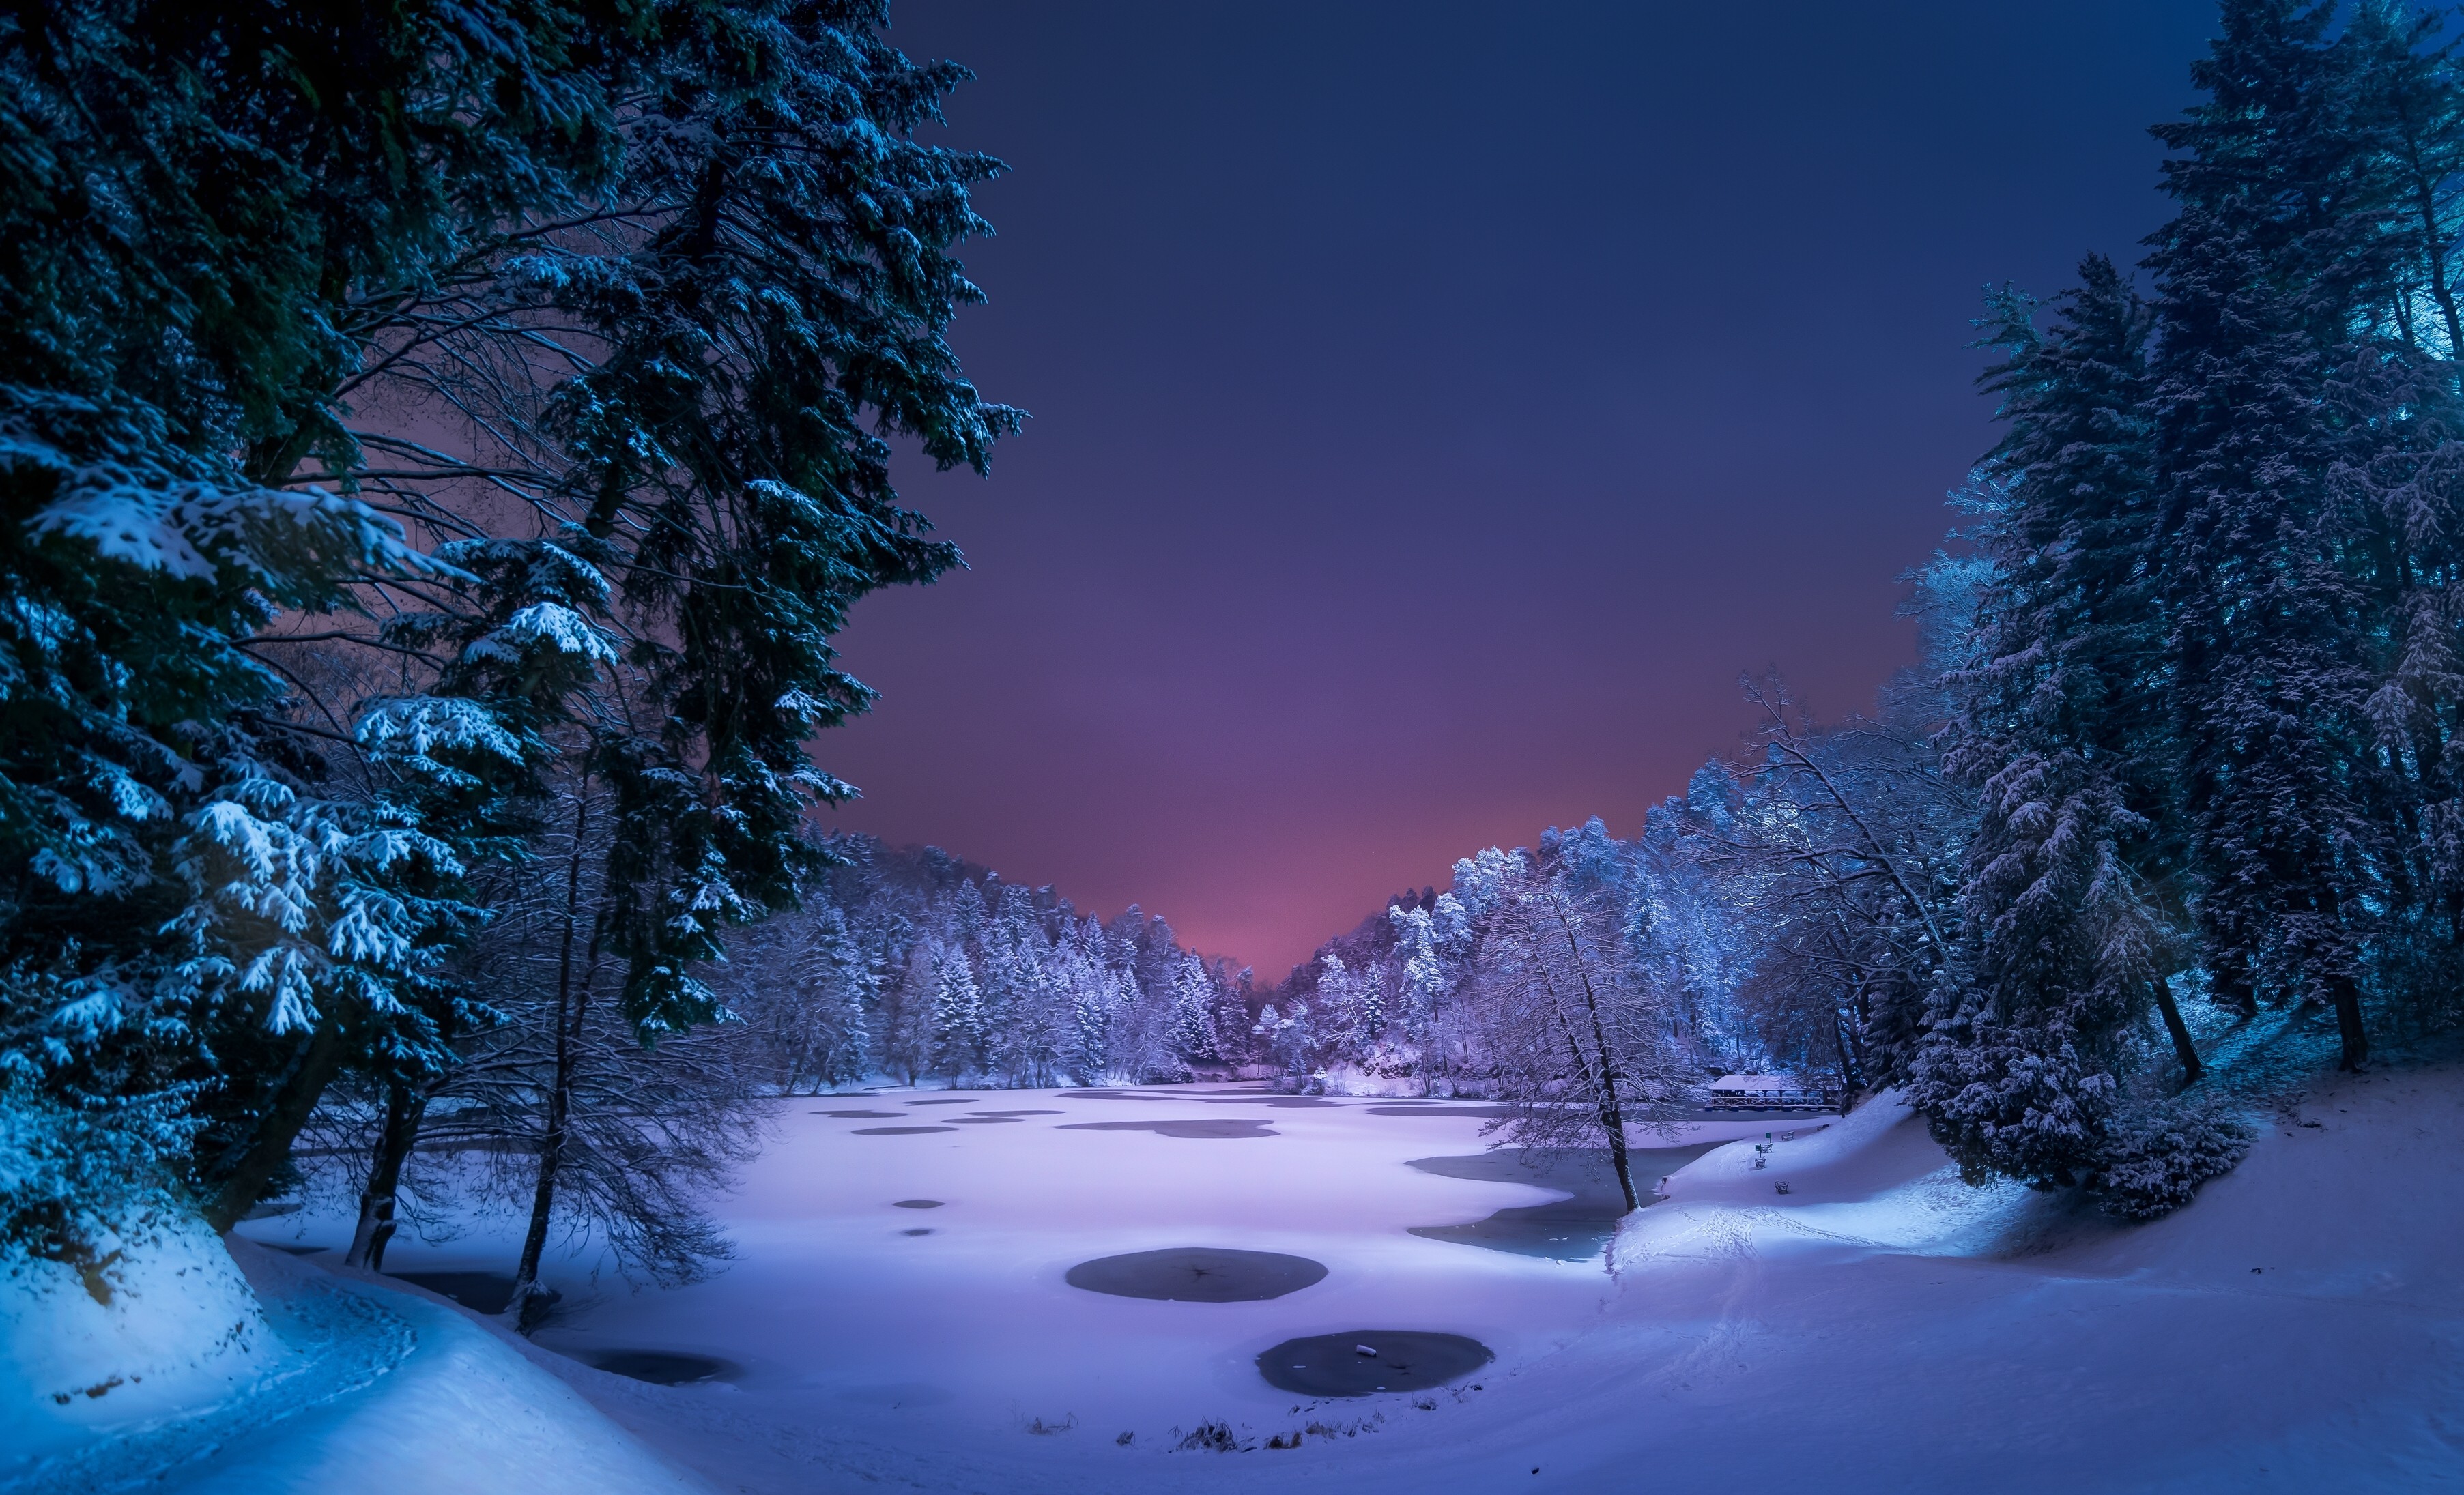 General 3610x2191 snow landscape forest lake night winter path ice frozen lake pond blue trees violet park nature cold outdoors low light snow covered sky